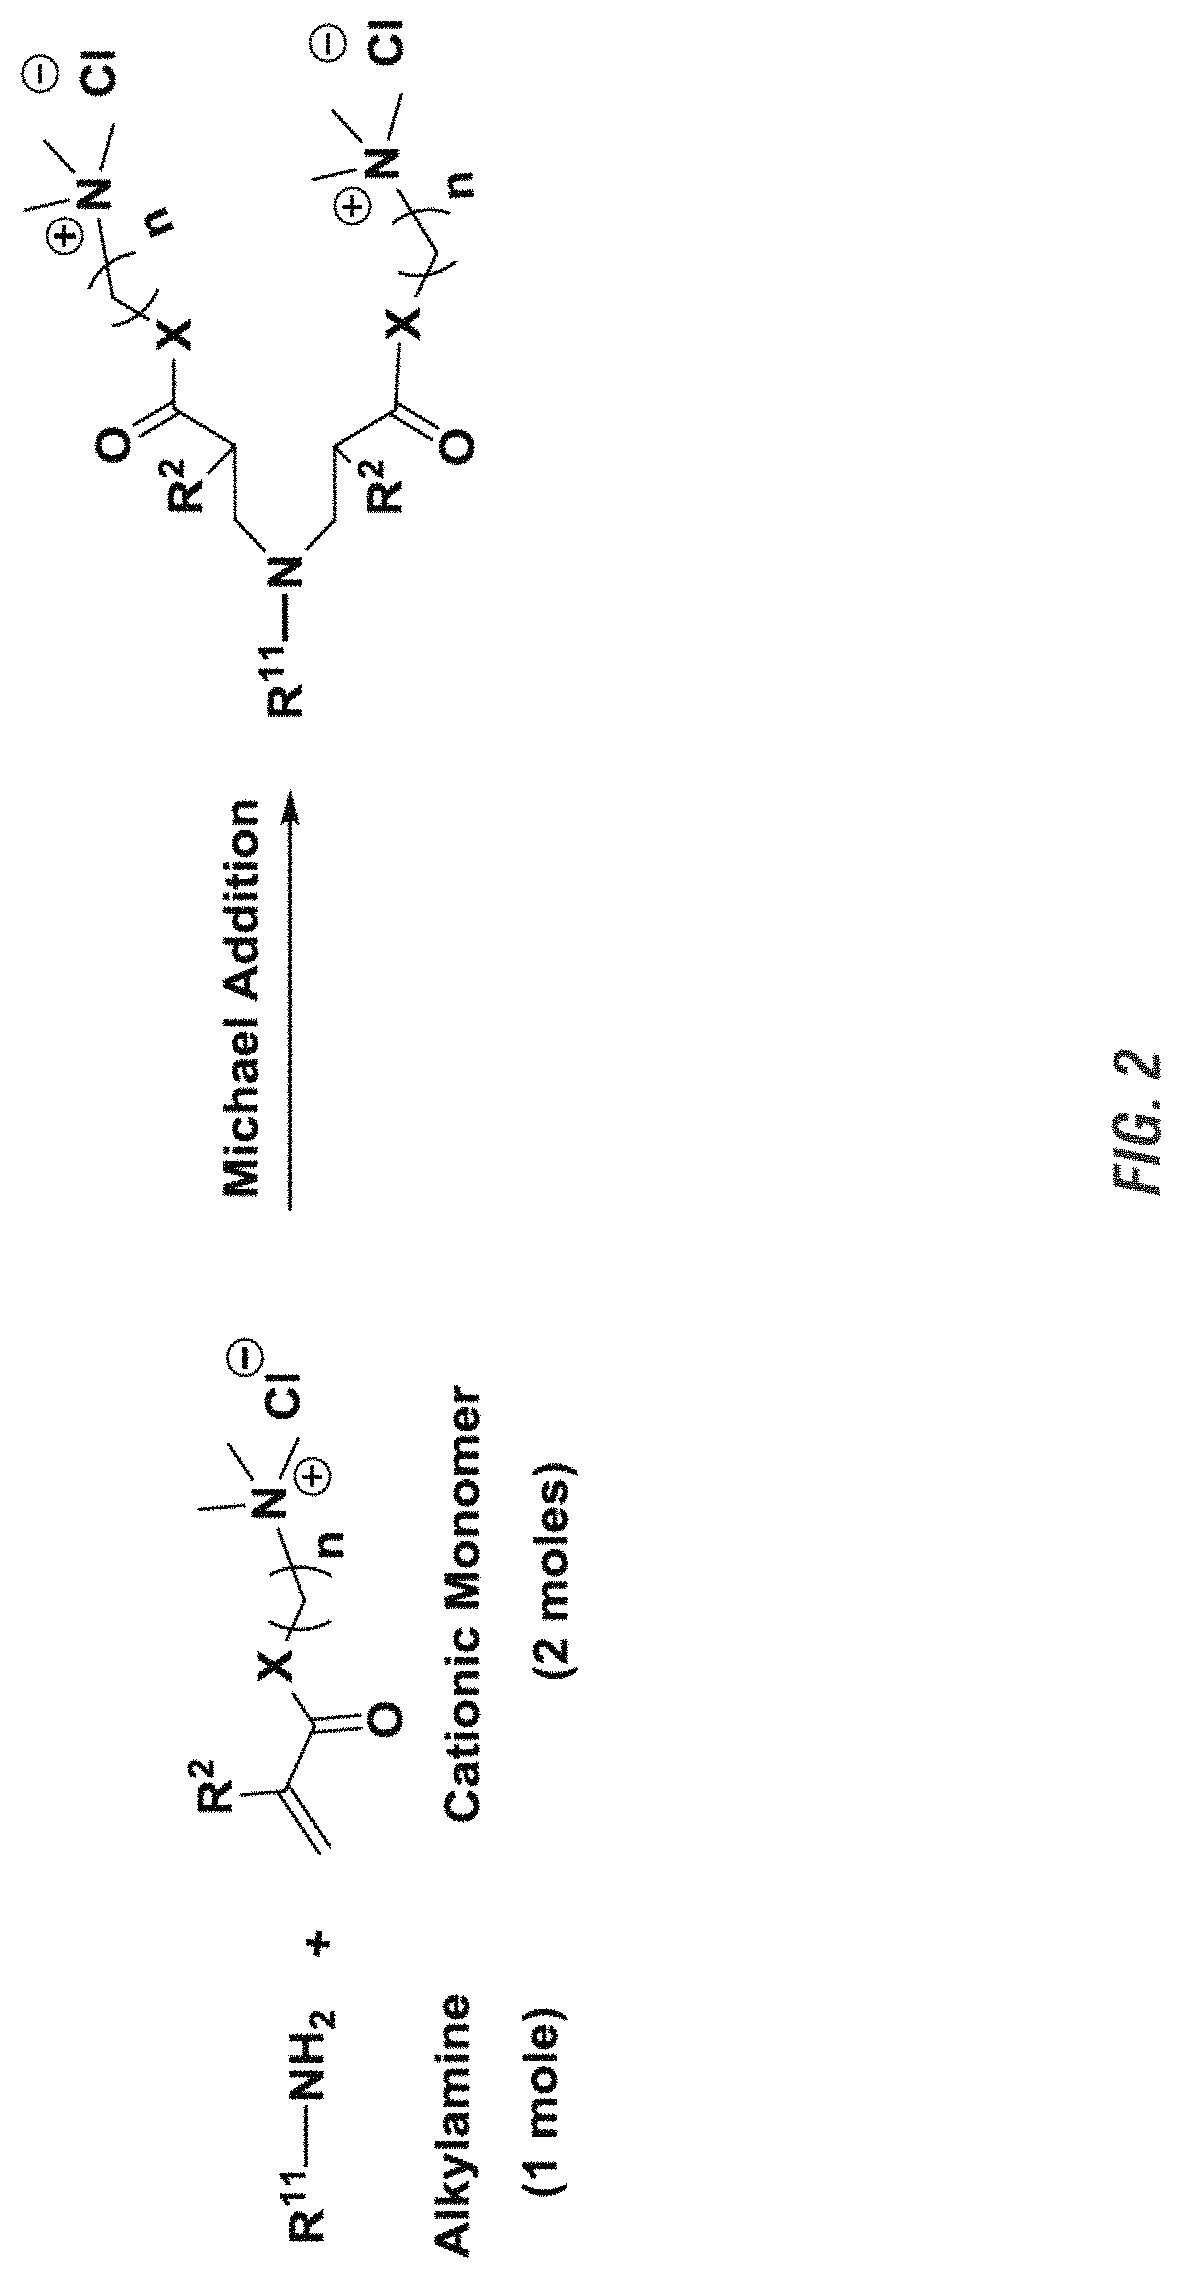 Use of di-ionic compounds as corrosion inhibitors in a water system